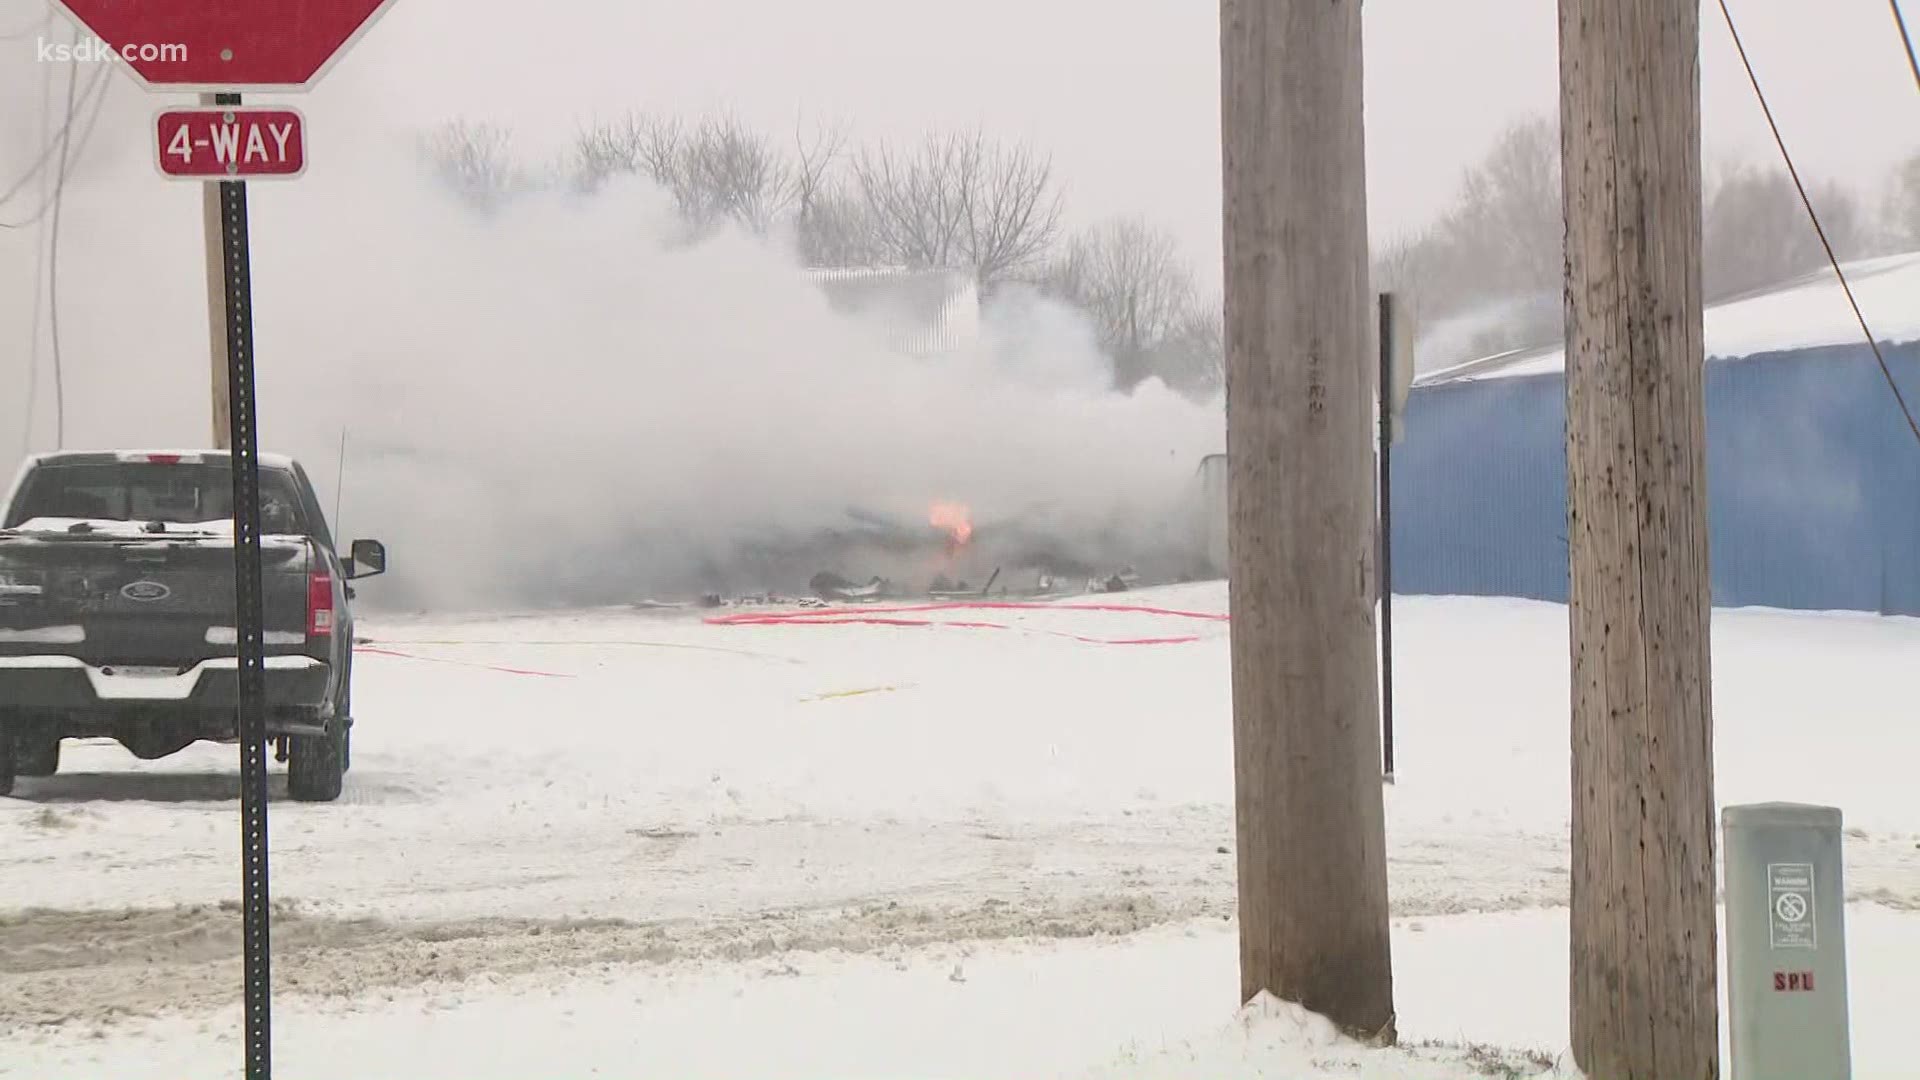 Crews from several area departments responded to the scene to help put out the flames in the middle of a snowstorm and dangerously cold temperatures